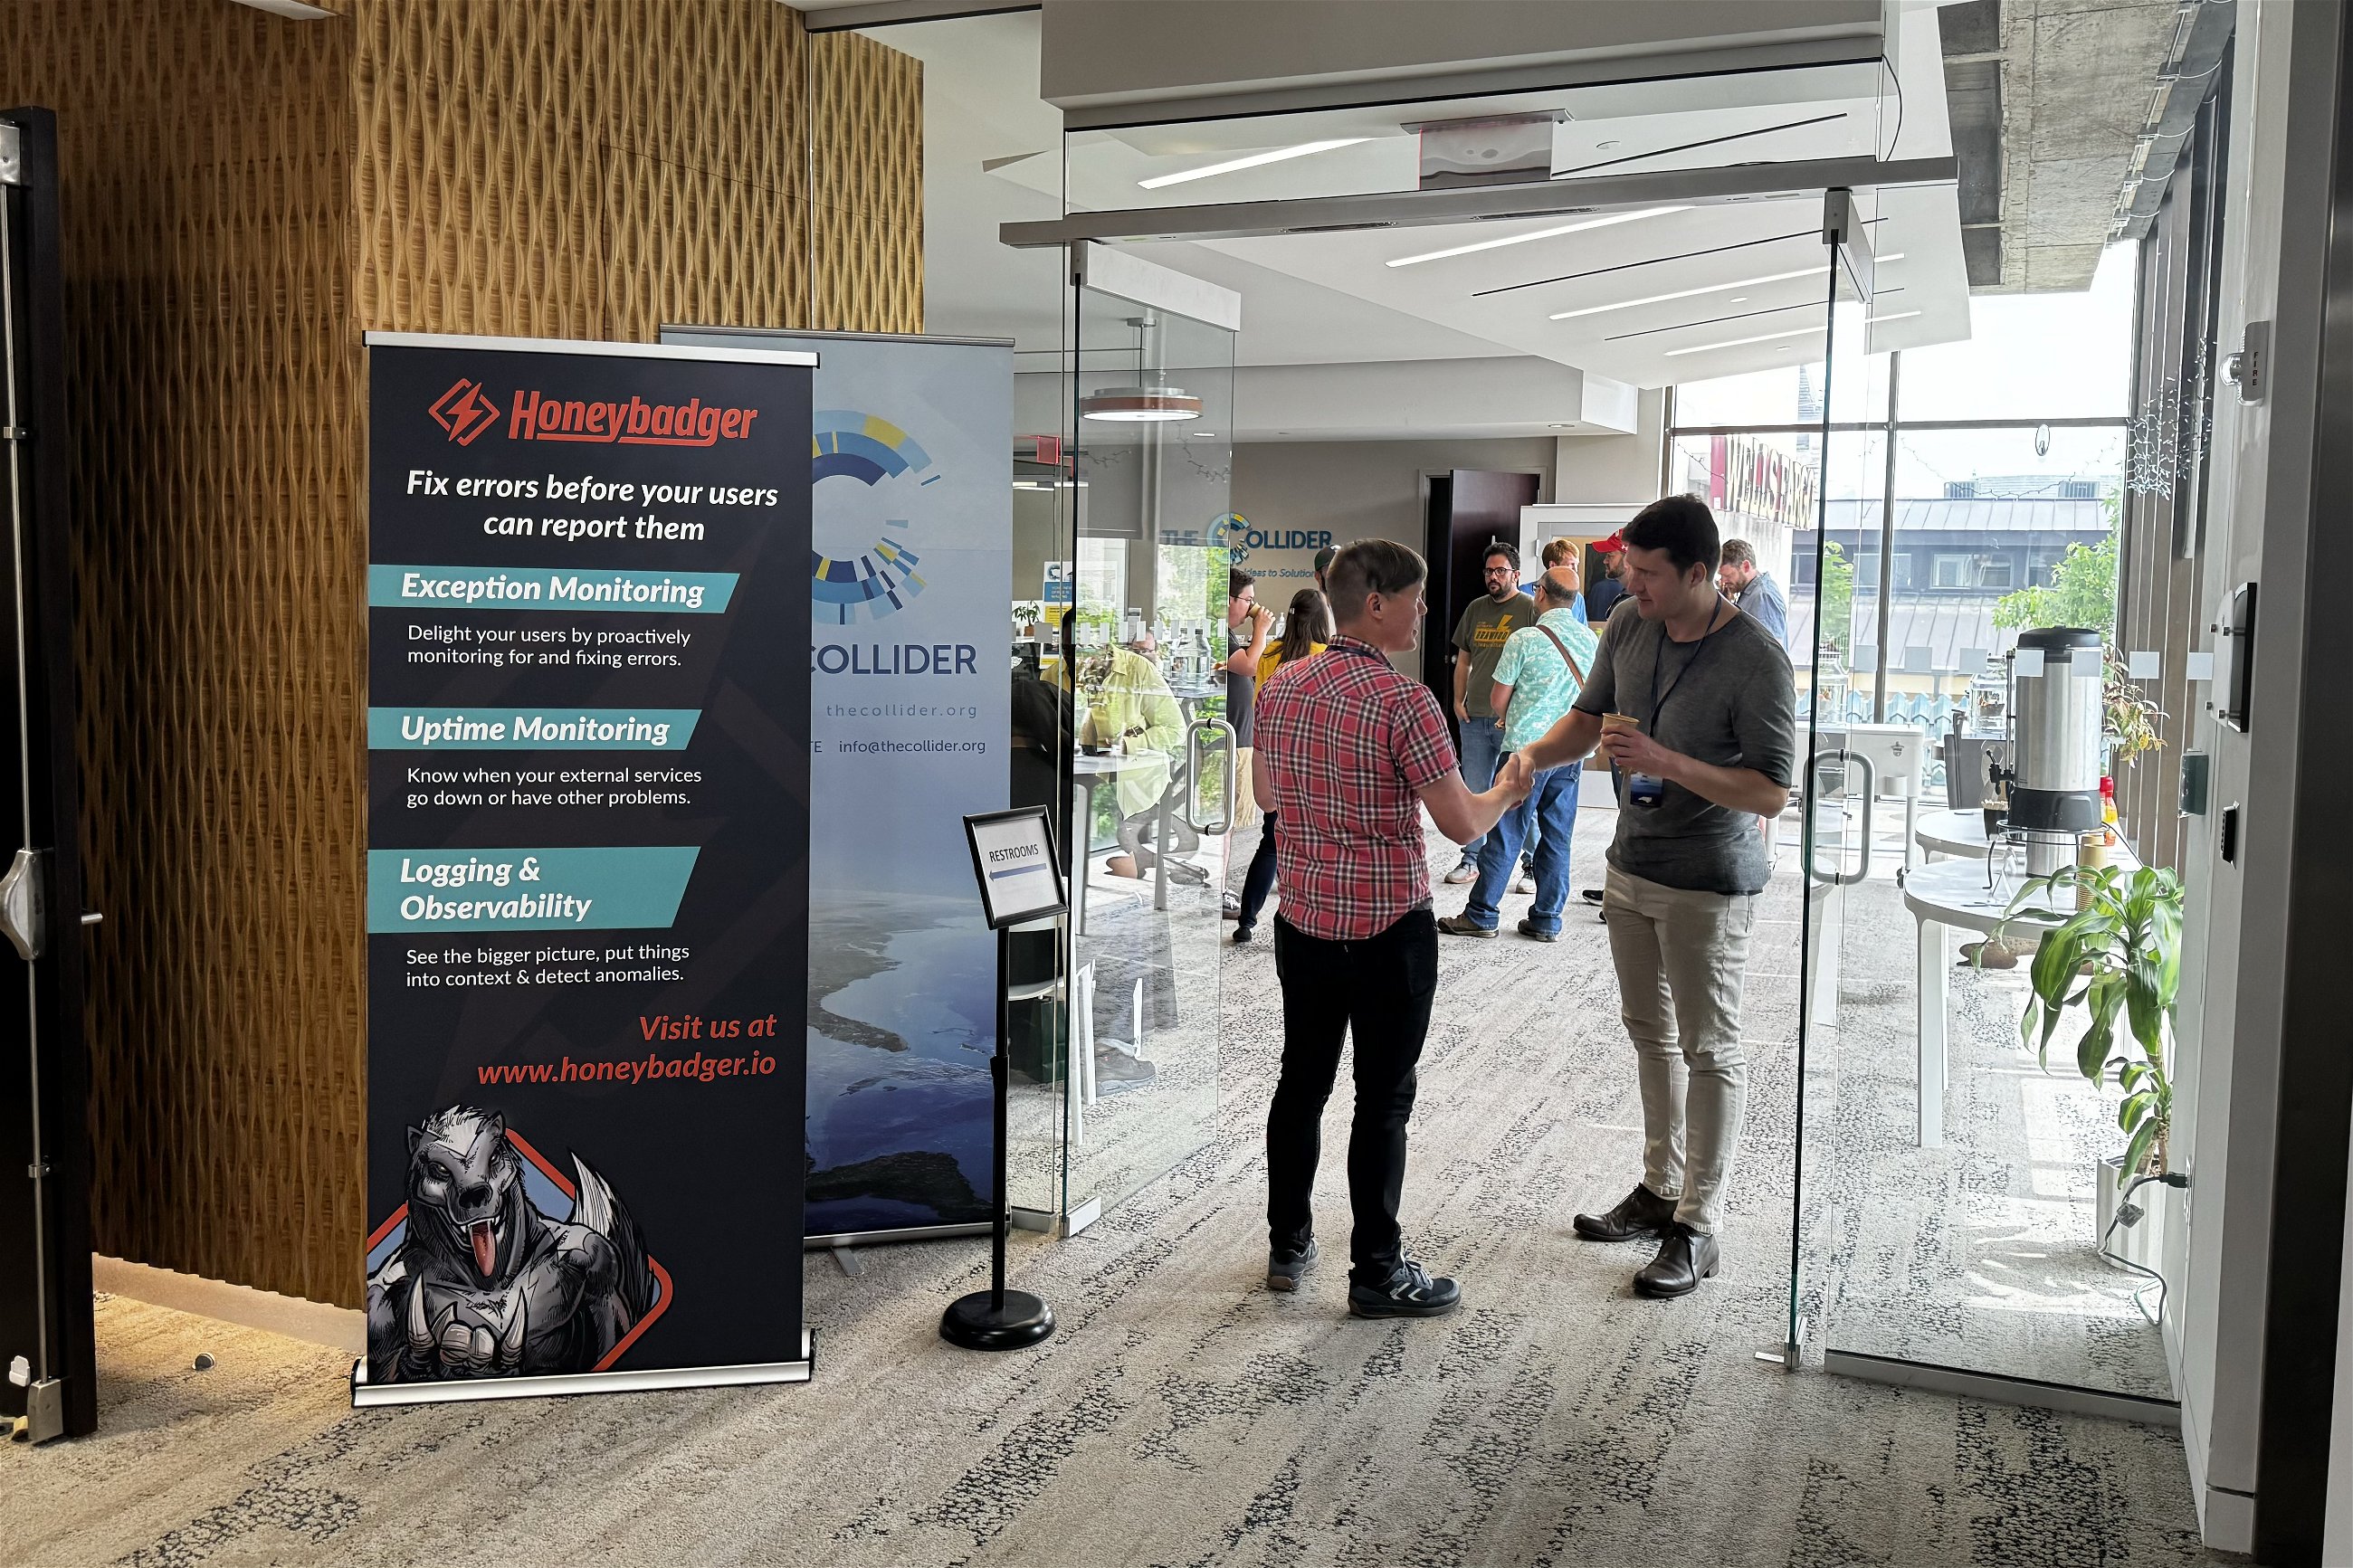 Two people shaking hands in a conference setting near a Honeybadger promotional banner, with other attendees visible in the background through glass doors. The banner highlights services like Exception Monitoring, Uptime Monitoring, and Logging & Observability.